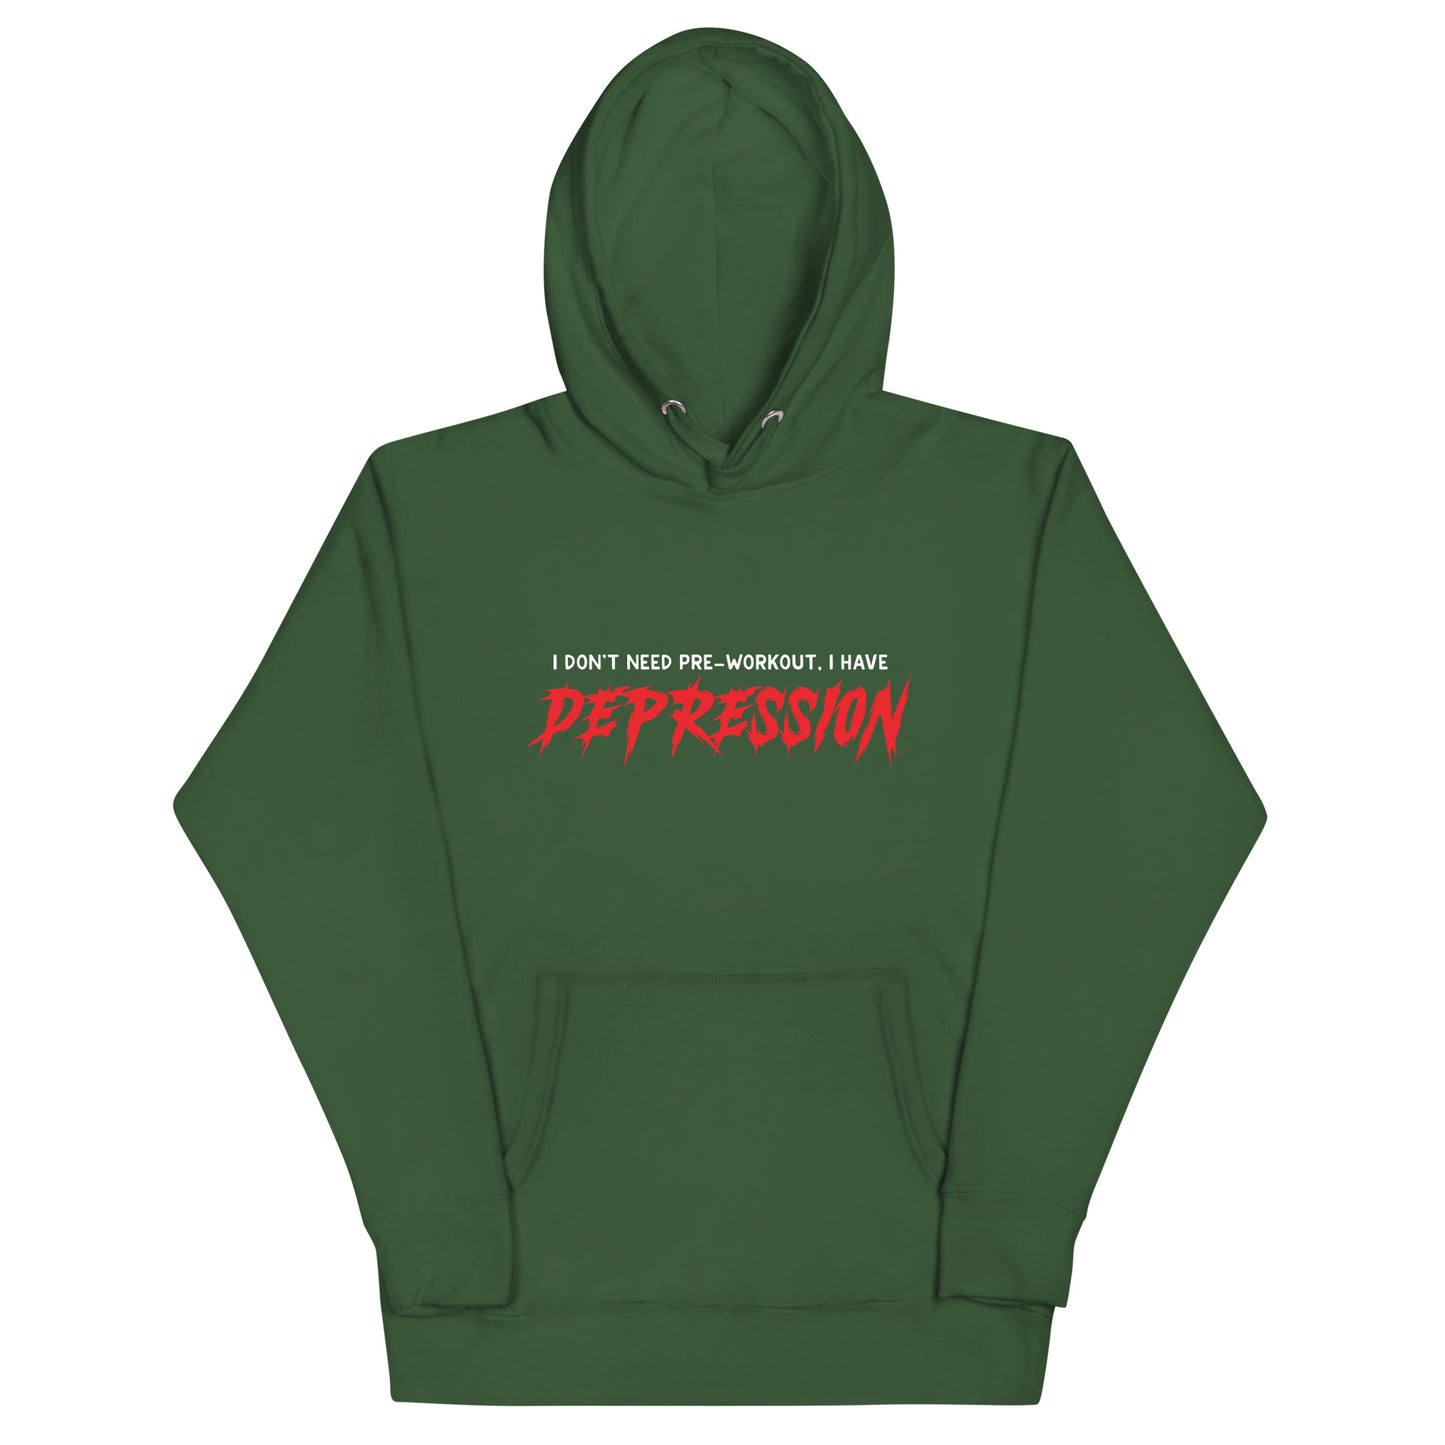 I Don't Need Pre-Workout I Have Depression Unisex Hoodie